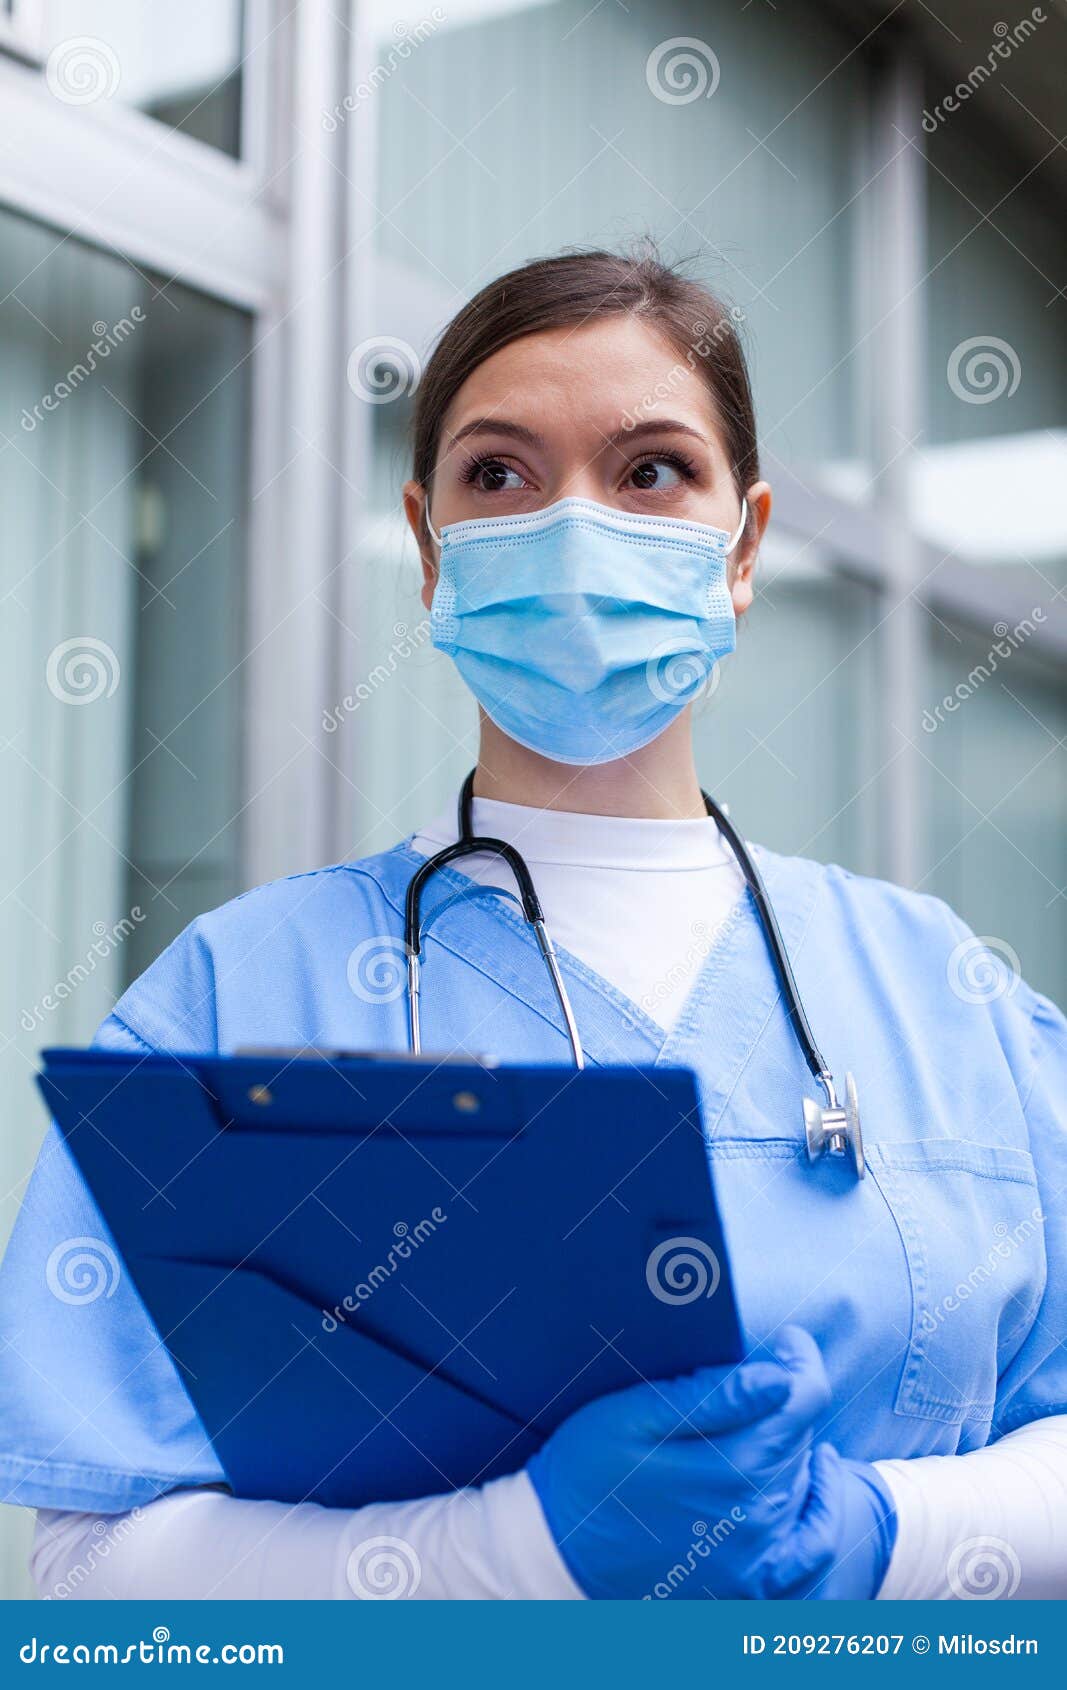 young female caucasian uk nhs gp doctor looking in distance